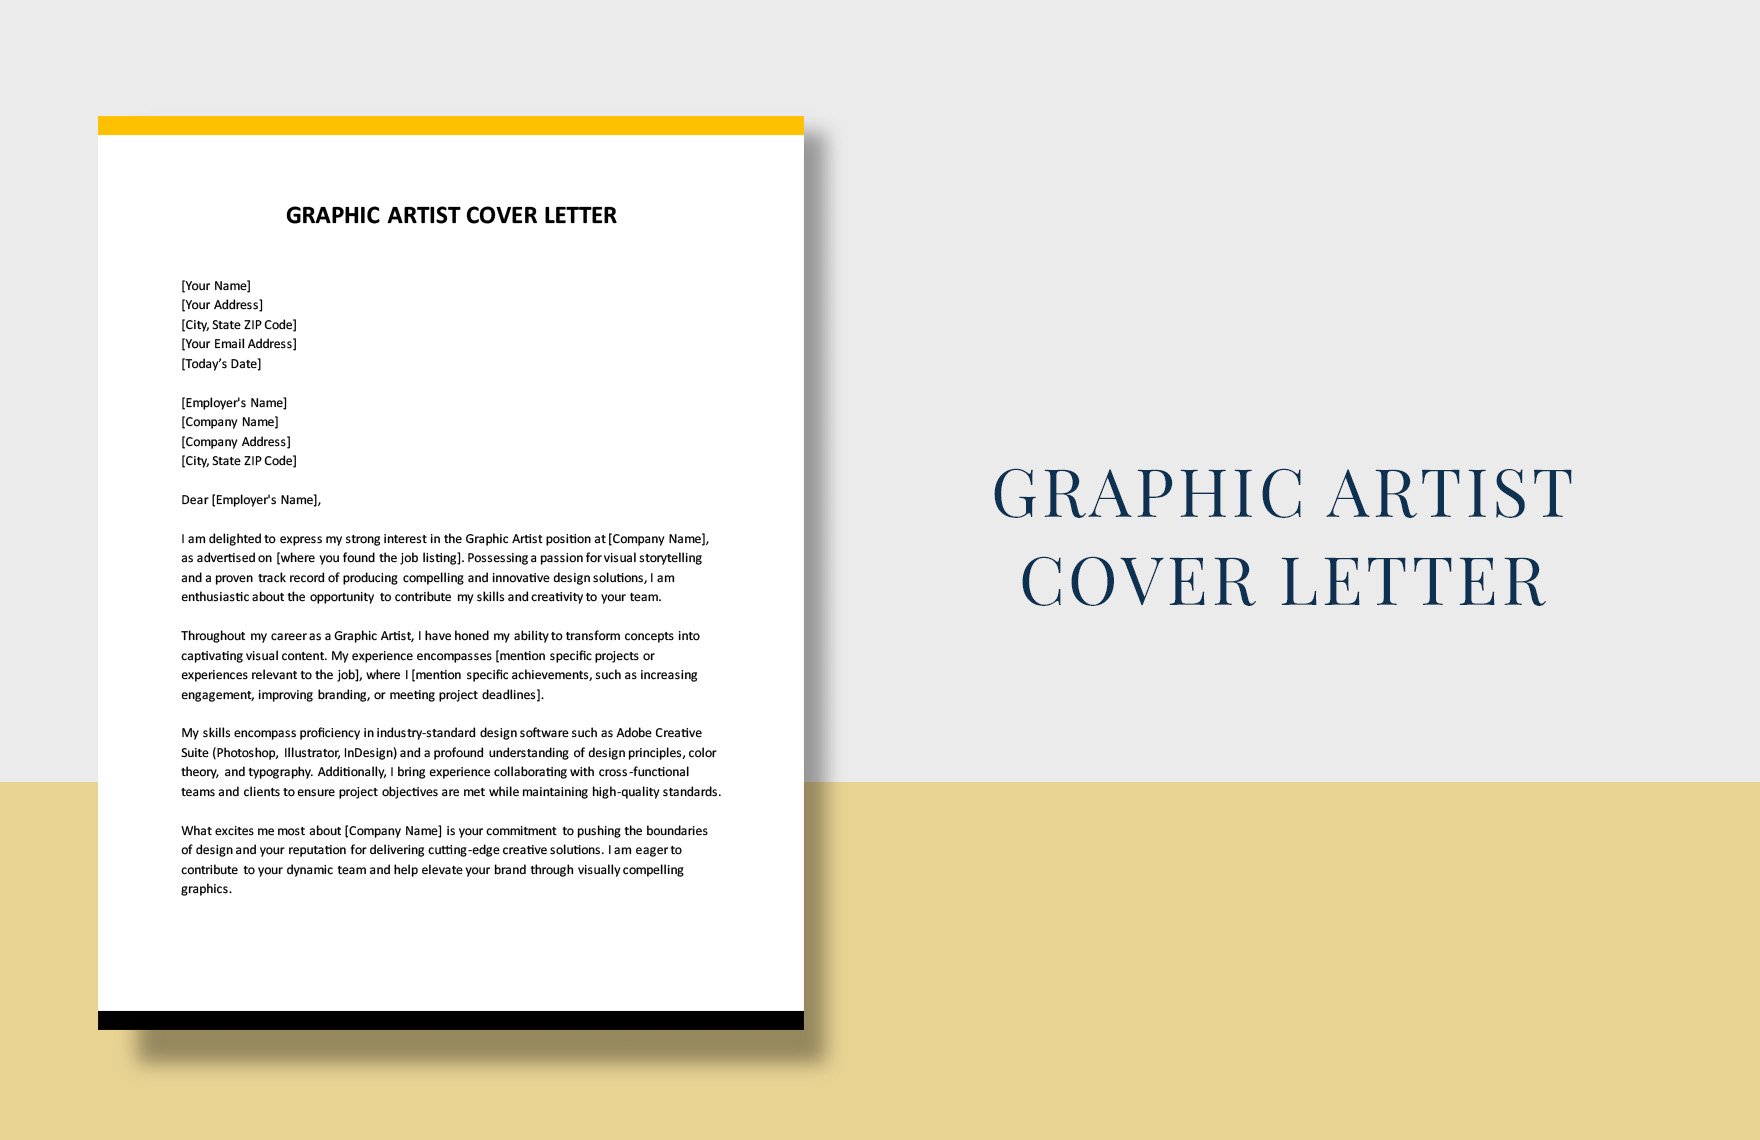 Graphic Artist Cover Letter